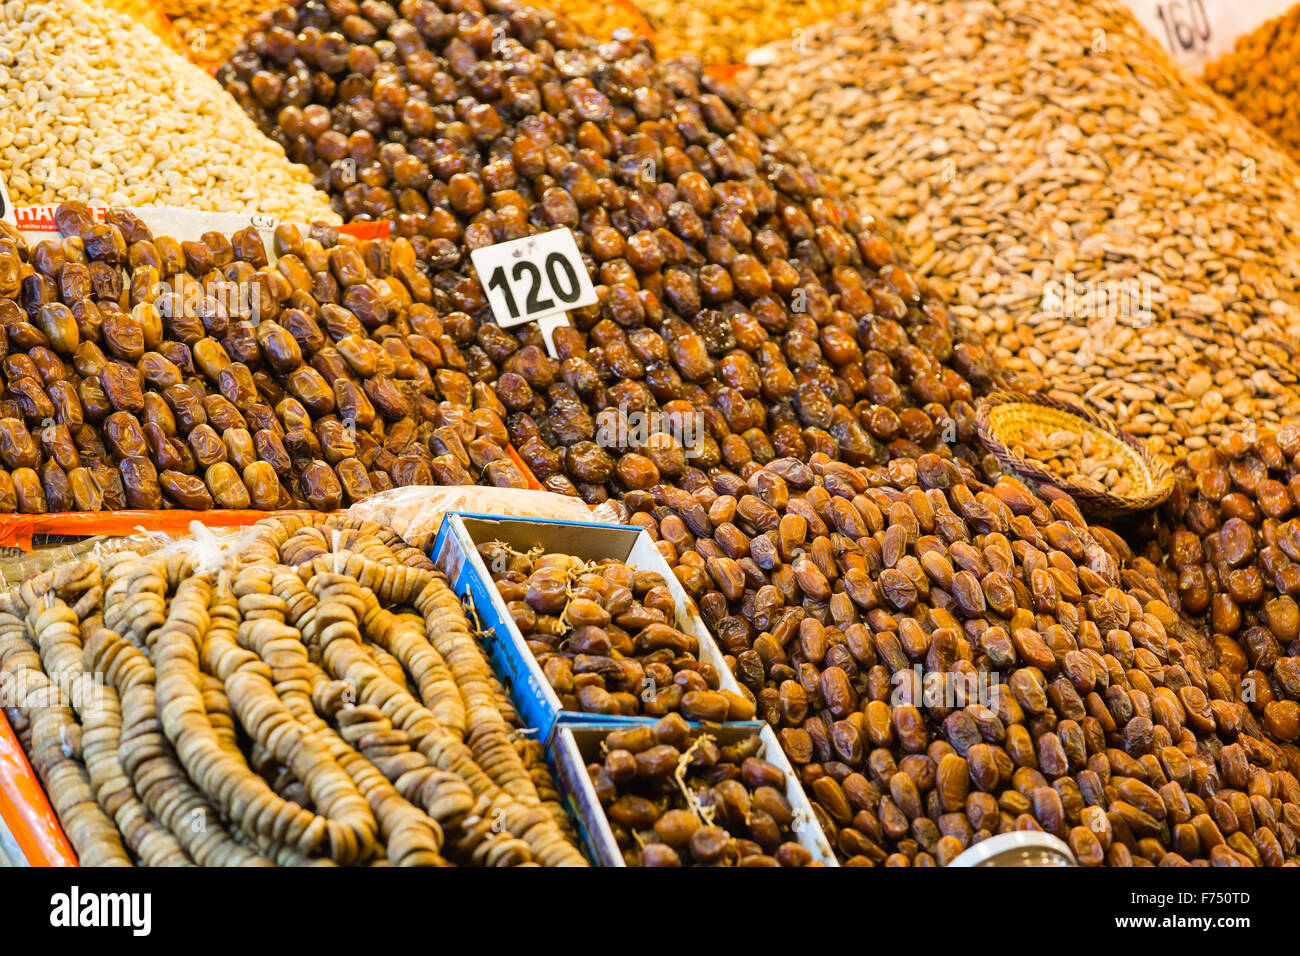 Dried dates, figs and nuts in Souk of Marrakech Medina Stock Photo